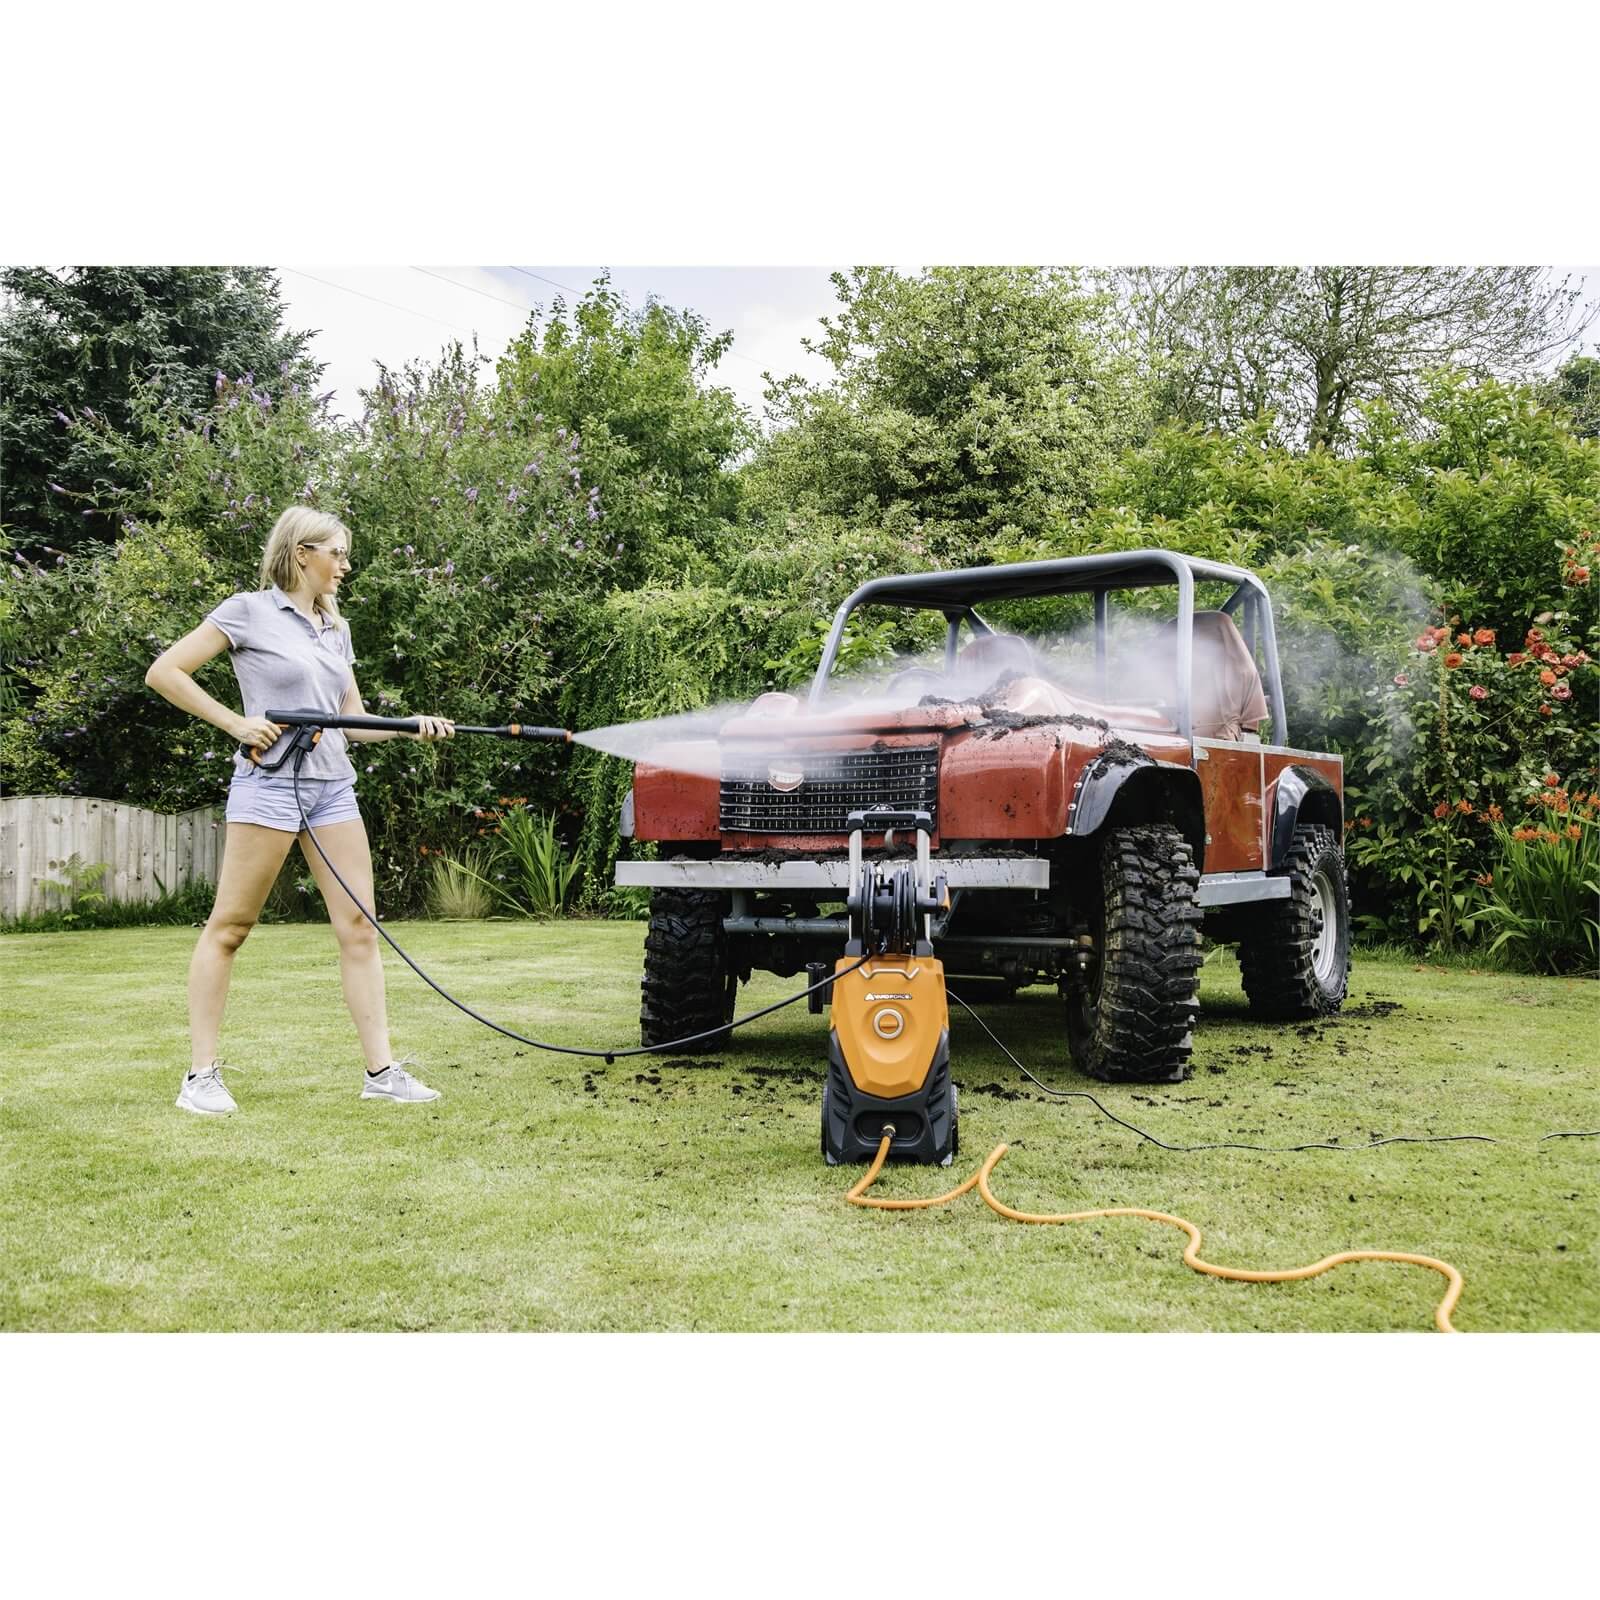 Yard Force 150 Bar 2000W High-Pressure Washer with Accessories